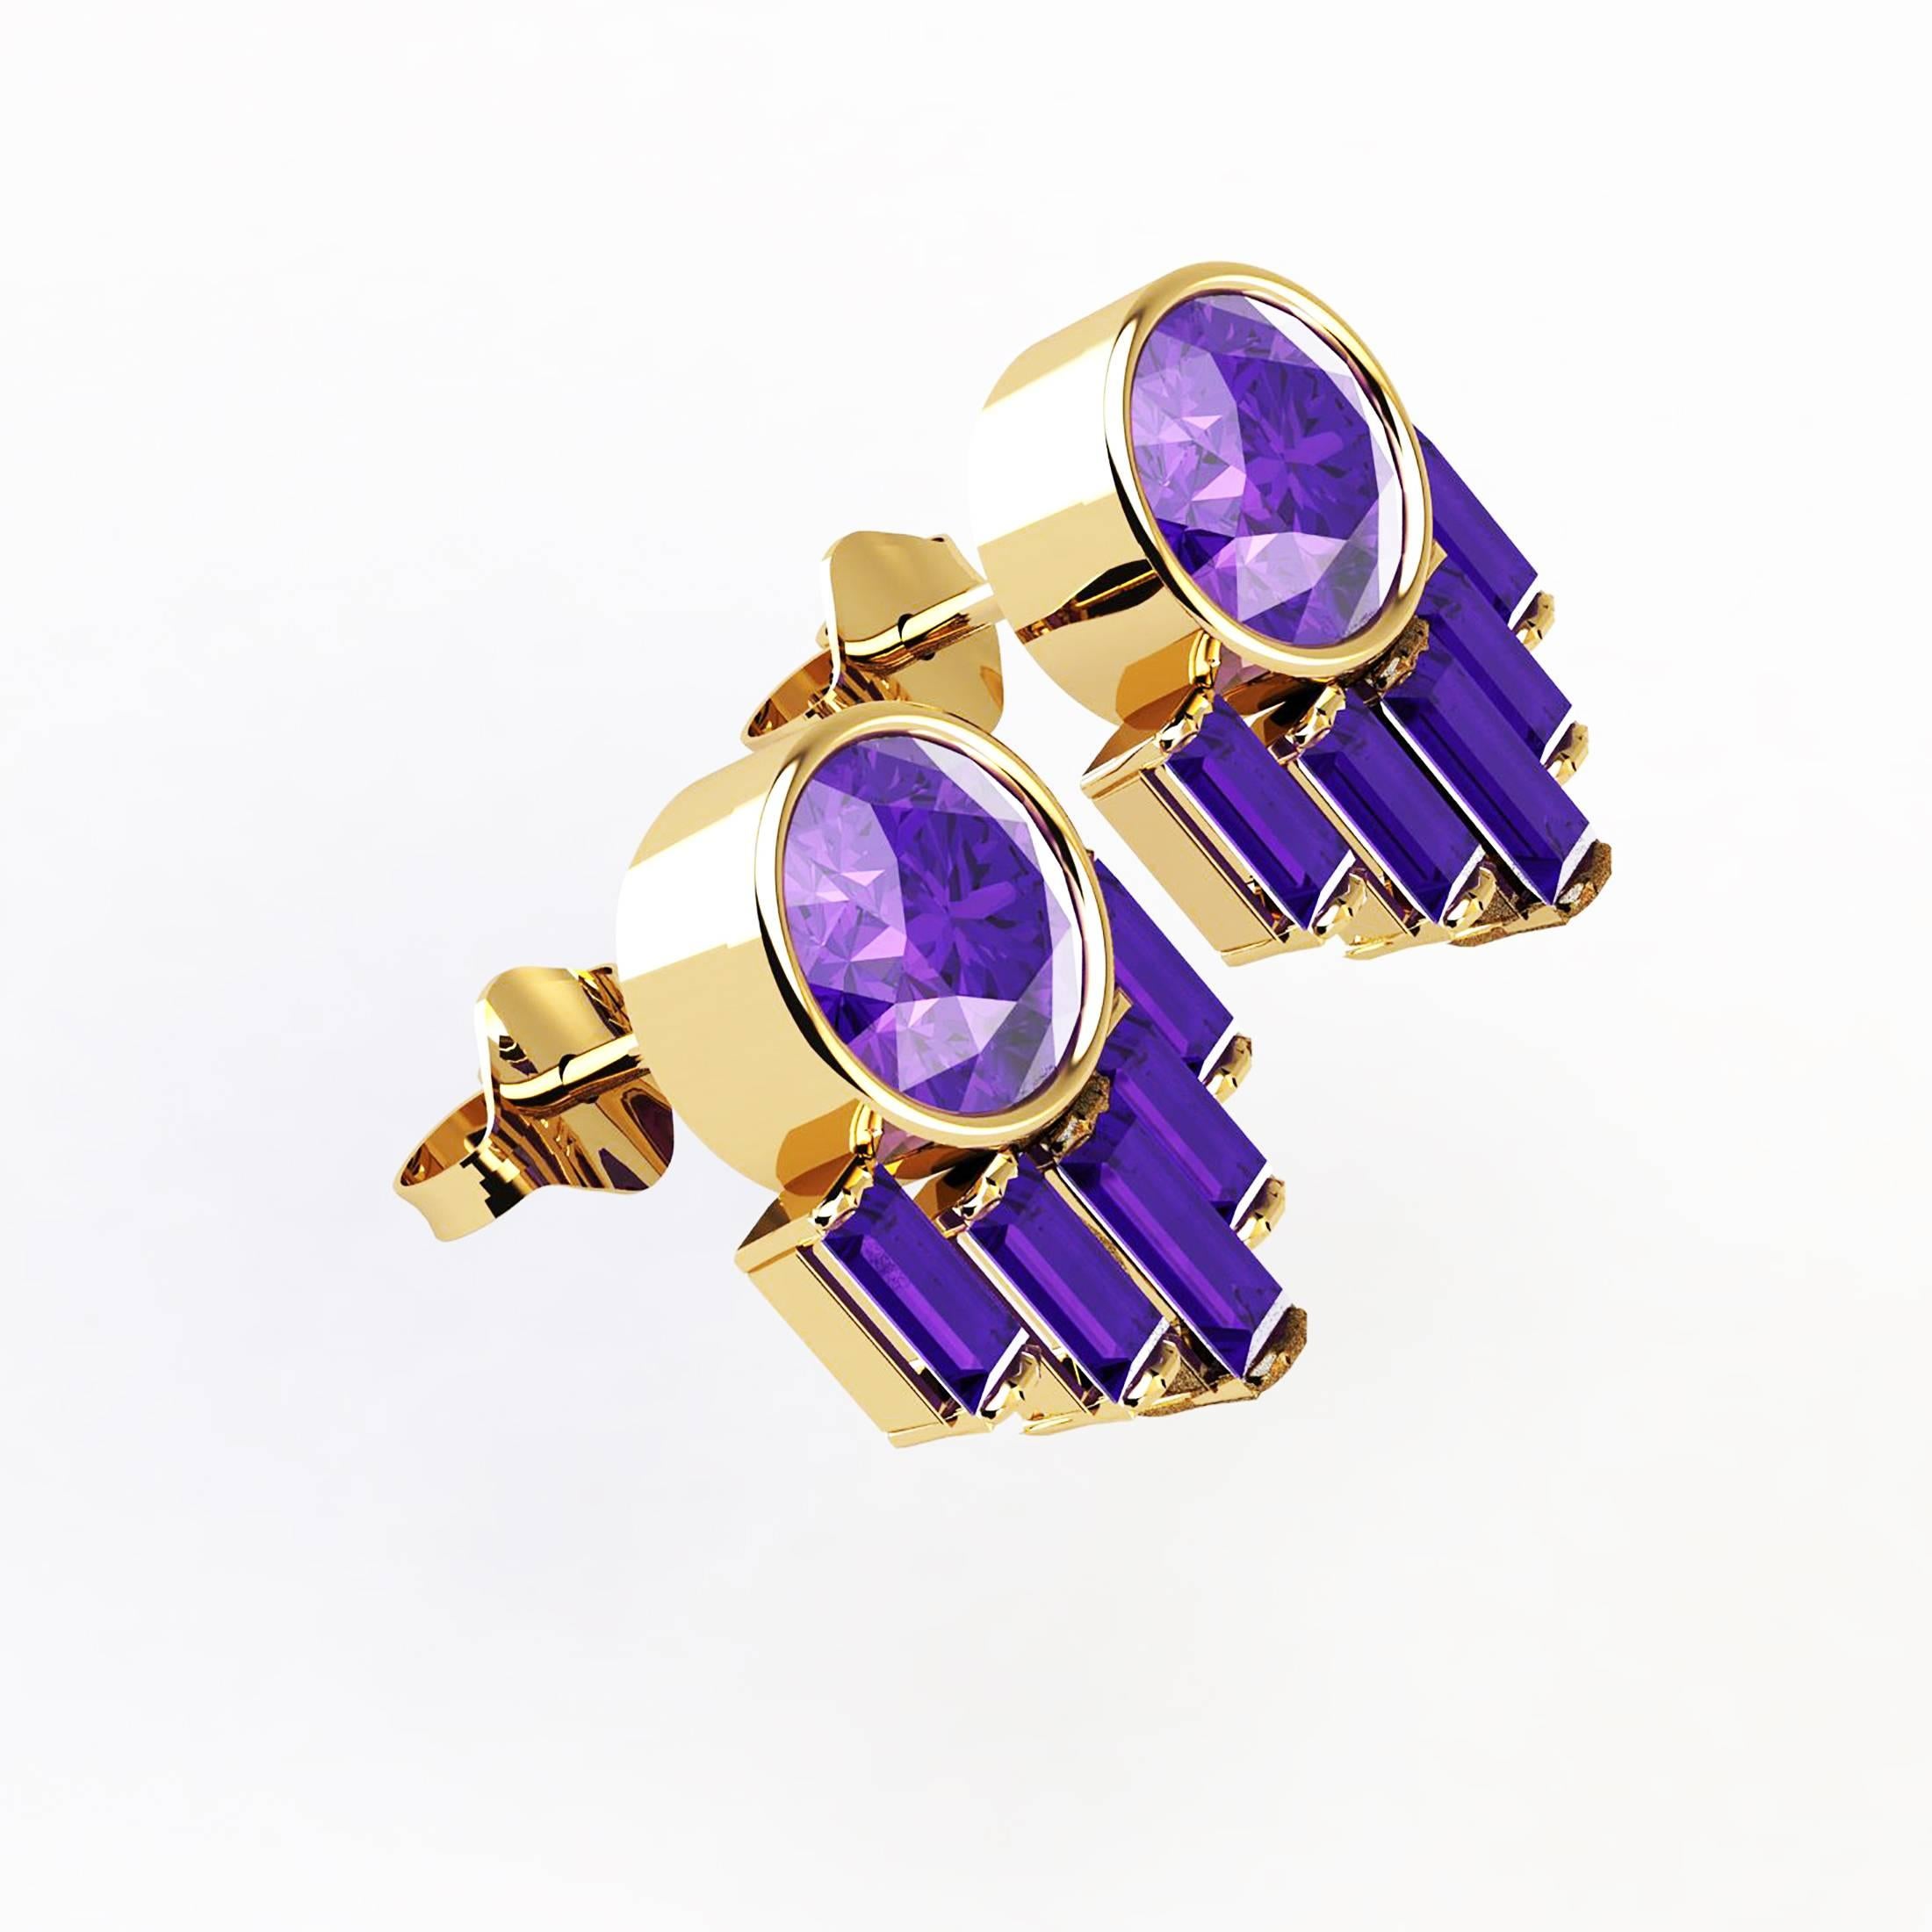 Ferrucci Art Deco Style design 18k yellow gold earrings, hand made in New York by Italian master jeweler, showcasing natural purple round Amethysts, embellished by amethyst baguettes, in a low setting style, easy to wear, pret-a-porter for an